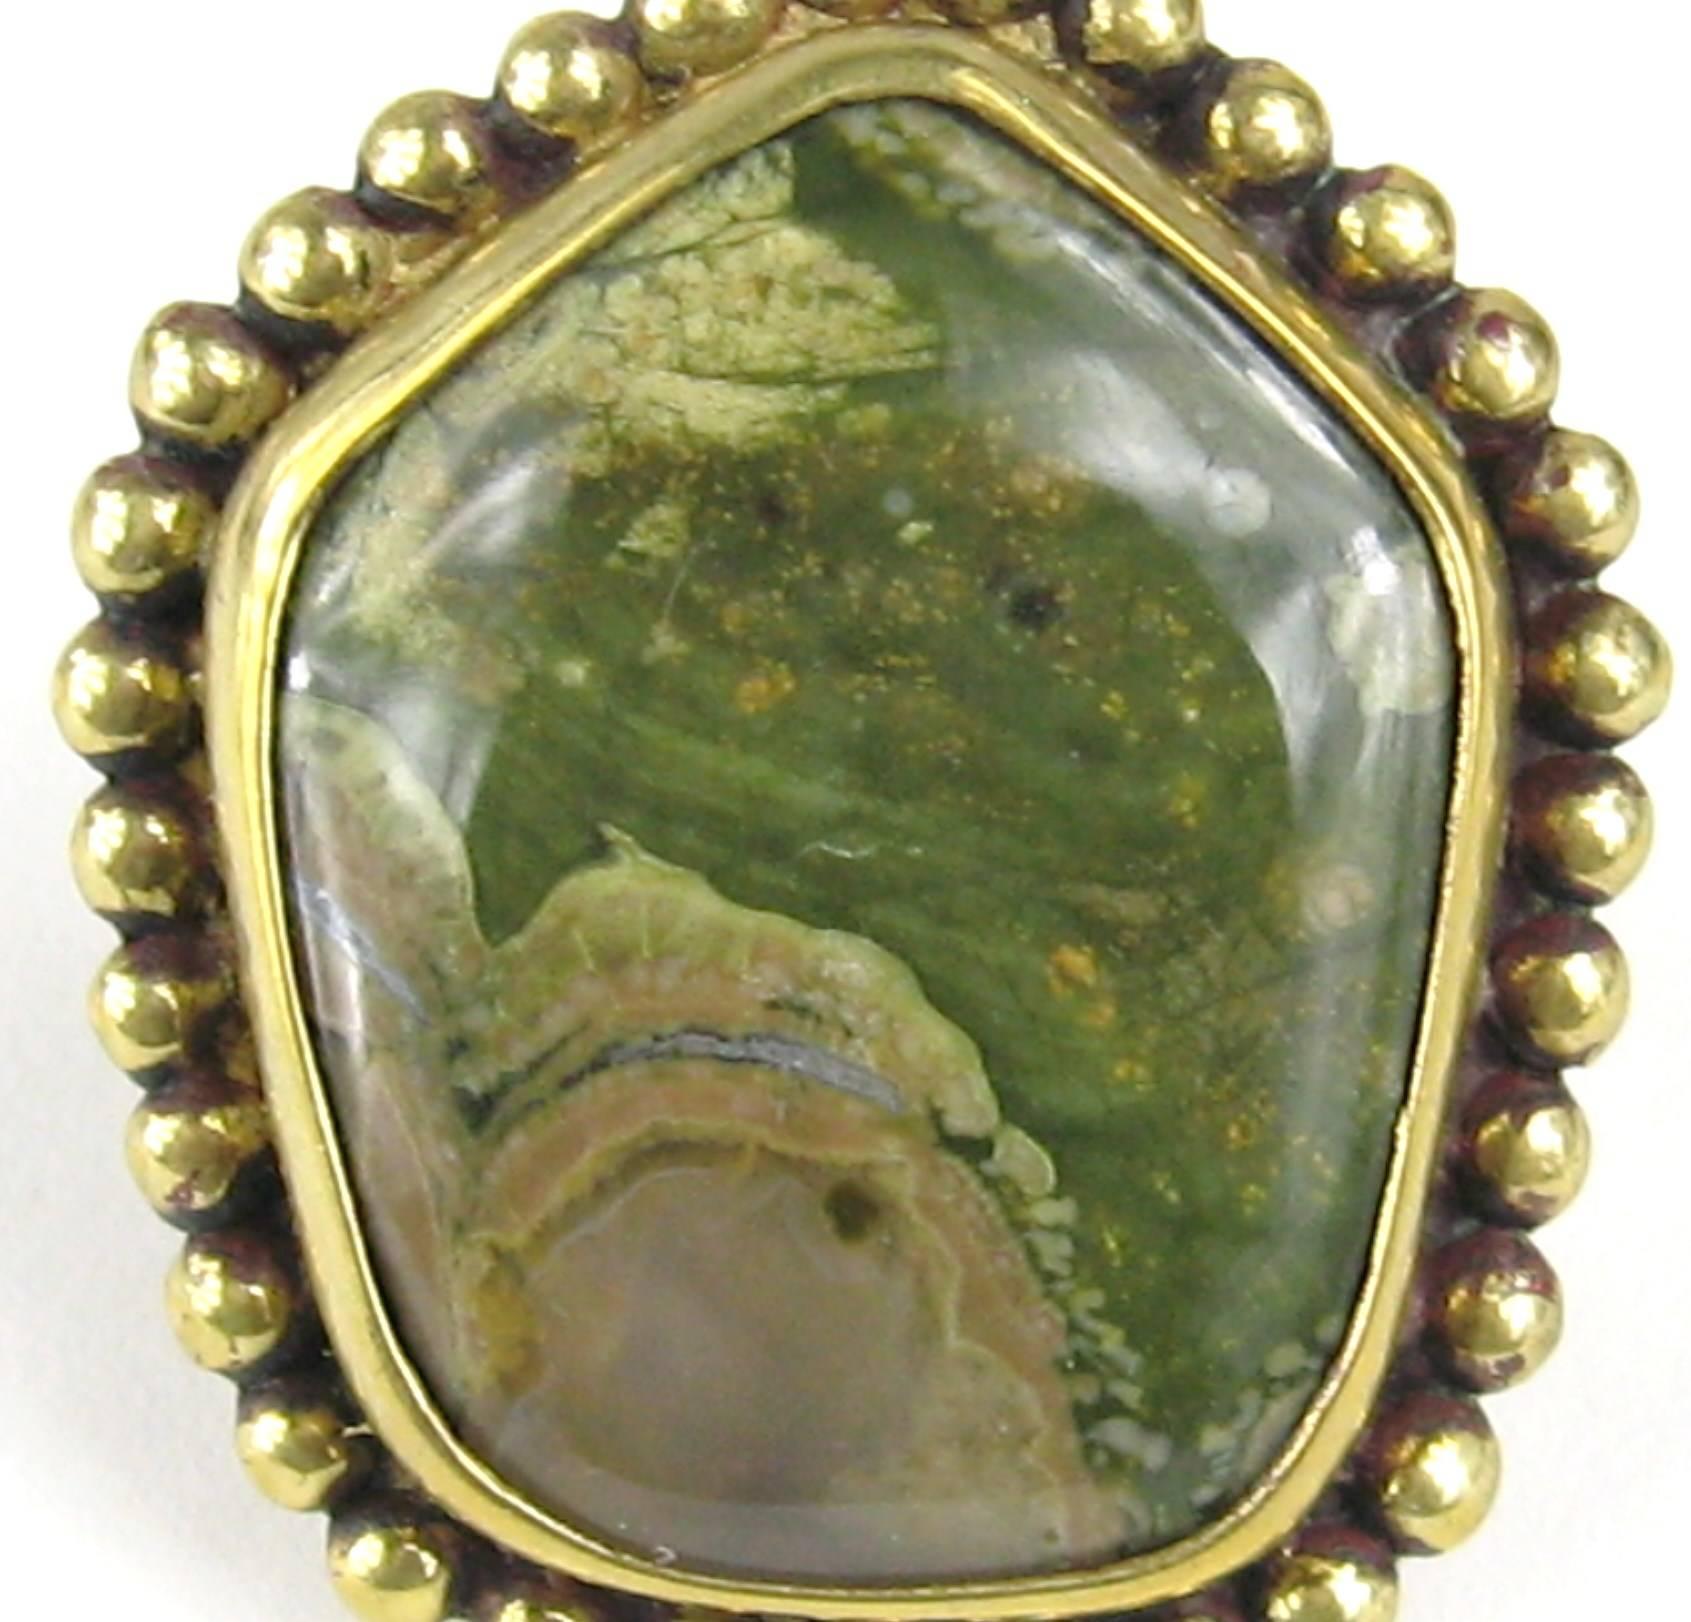 This is vintage Dweck, dated 92 inside shank of the Ring Bronze wash over the sterling. This is a Massive Vintage Stephen Dweck Sterling Silver Ring. The stone looks like Jasper. We have many more pieces of Dweck listed on our storefront. This is